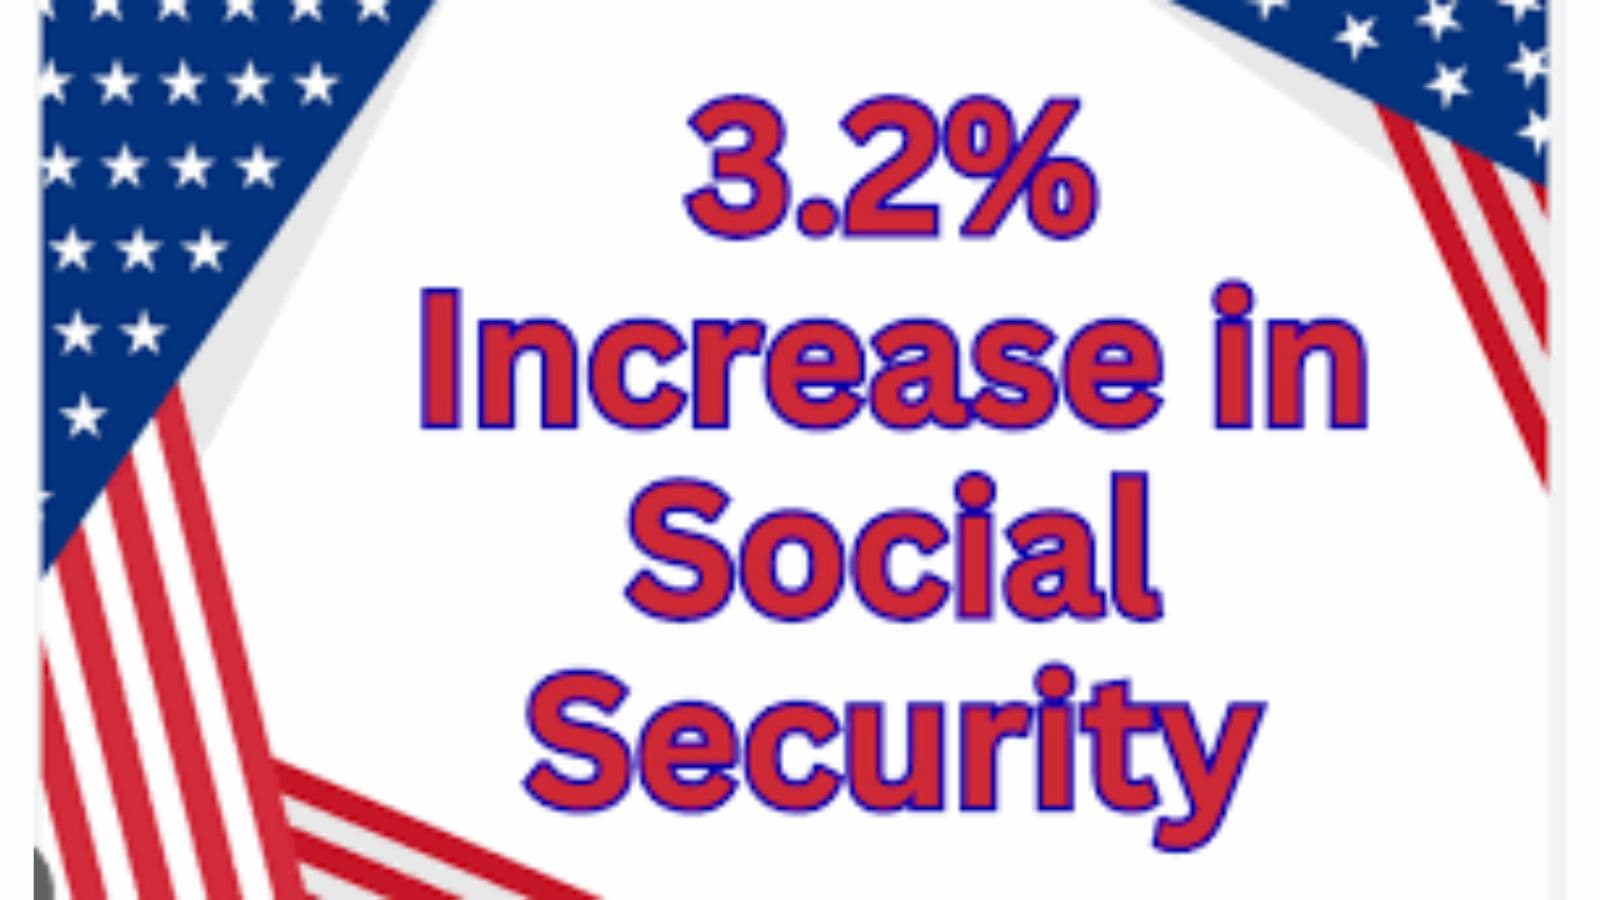 Social Security Benefits Set to Surge by 3.2% (1)